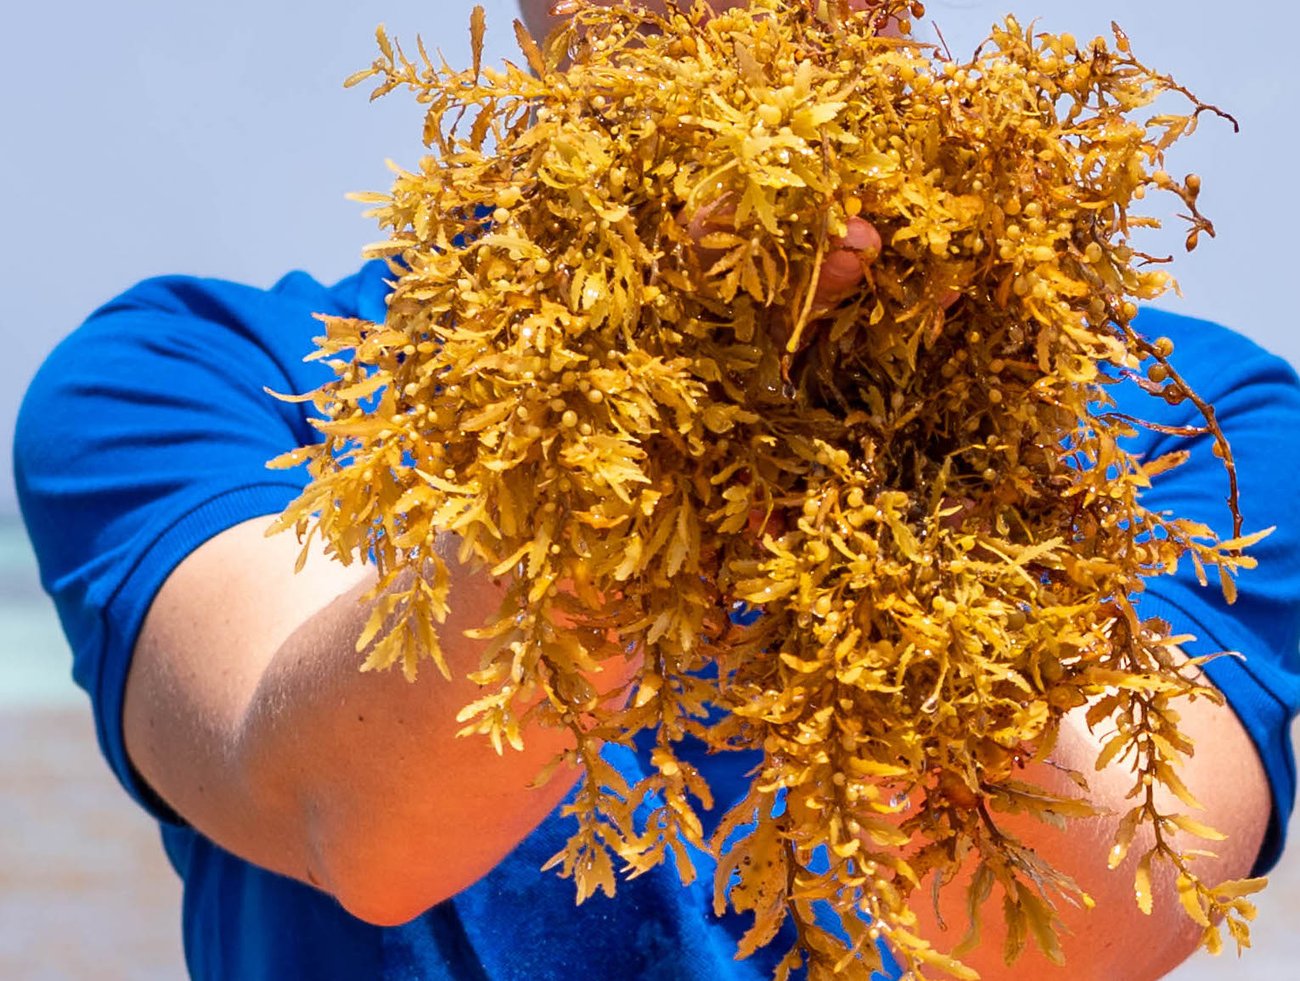 Origin by Ocean announces open call for seaweed suppliers to feed biorefinery expansion